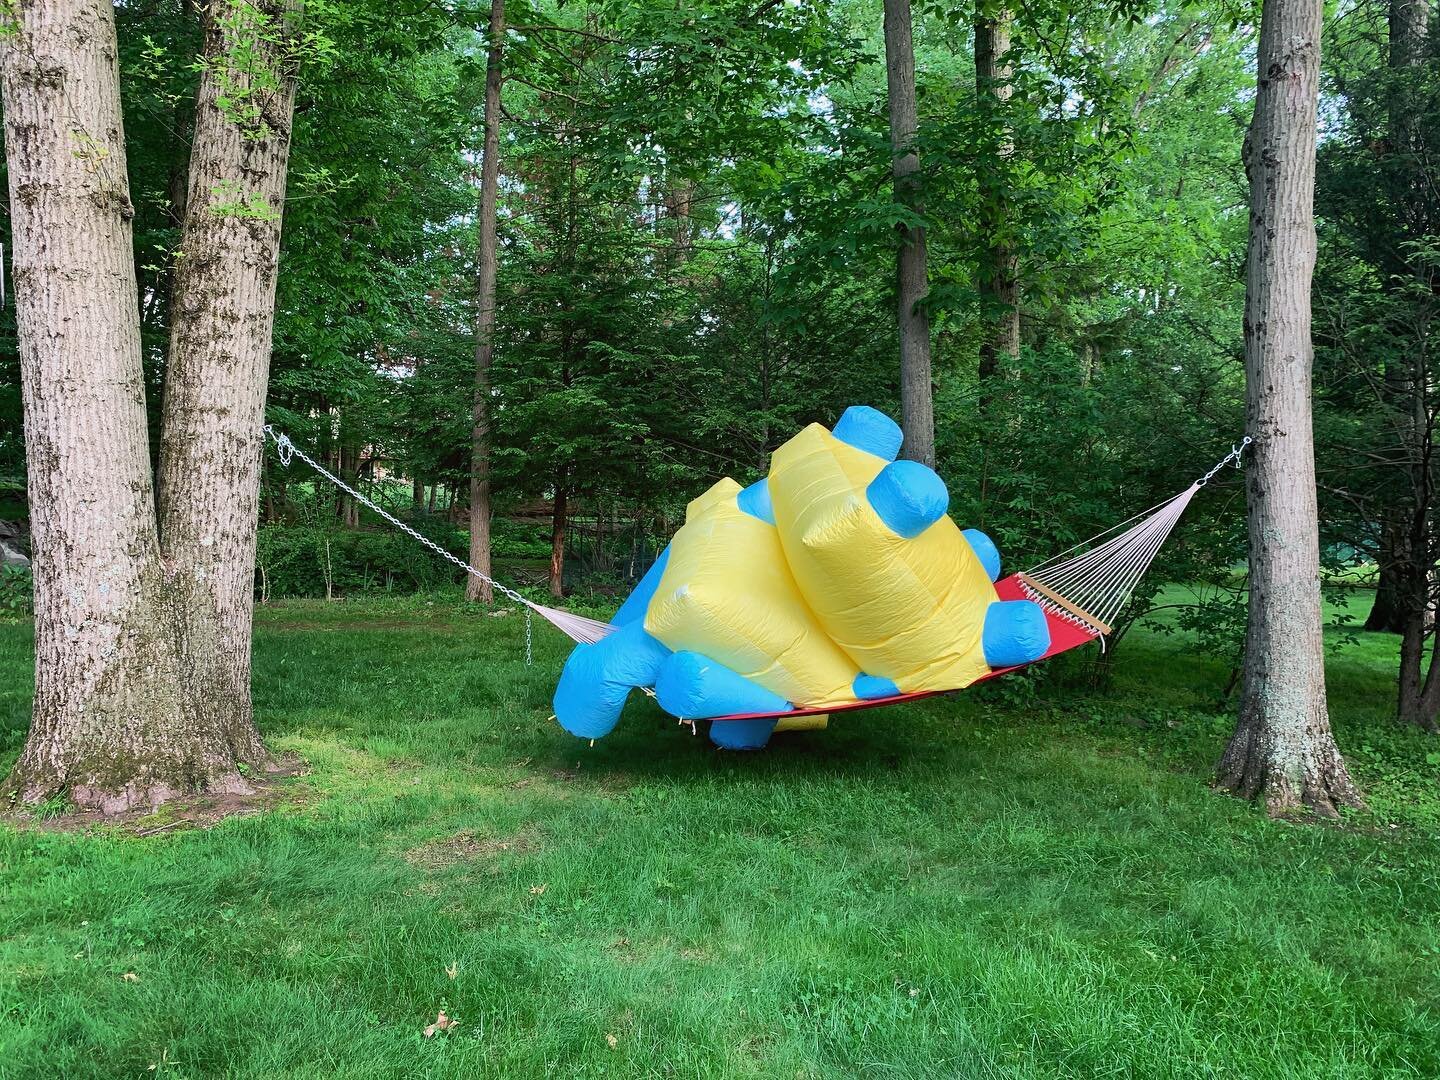 😴 Bull-Dozing (22/52) 🐮💤
&bull;
&bull;
Double Decker really leaning into the R&amp;R&hellip;🍃😌🌿 hope your weekend is as recharging as DD&rsquo;s!! 🔆💙💛
&bull;
&bull;
&bull;
#inflatable #fourwisecattle #wanderingcattle #balloon #sculpture #sof